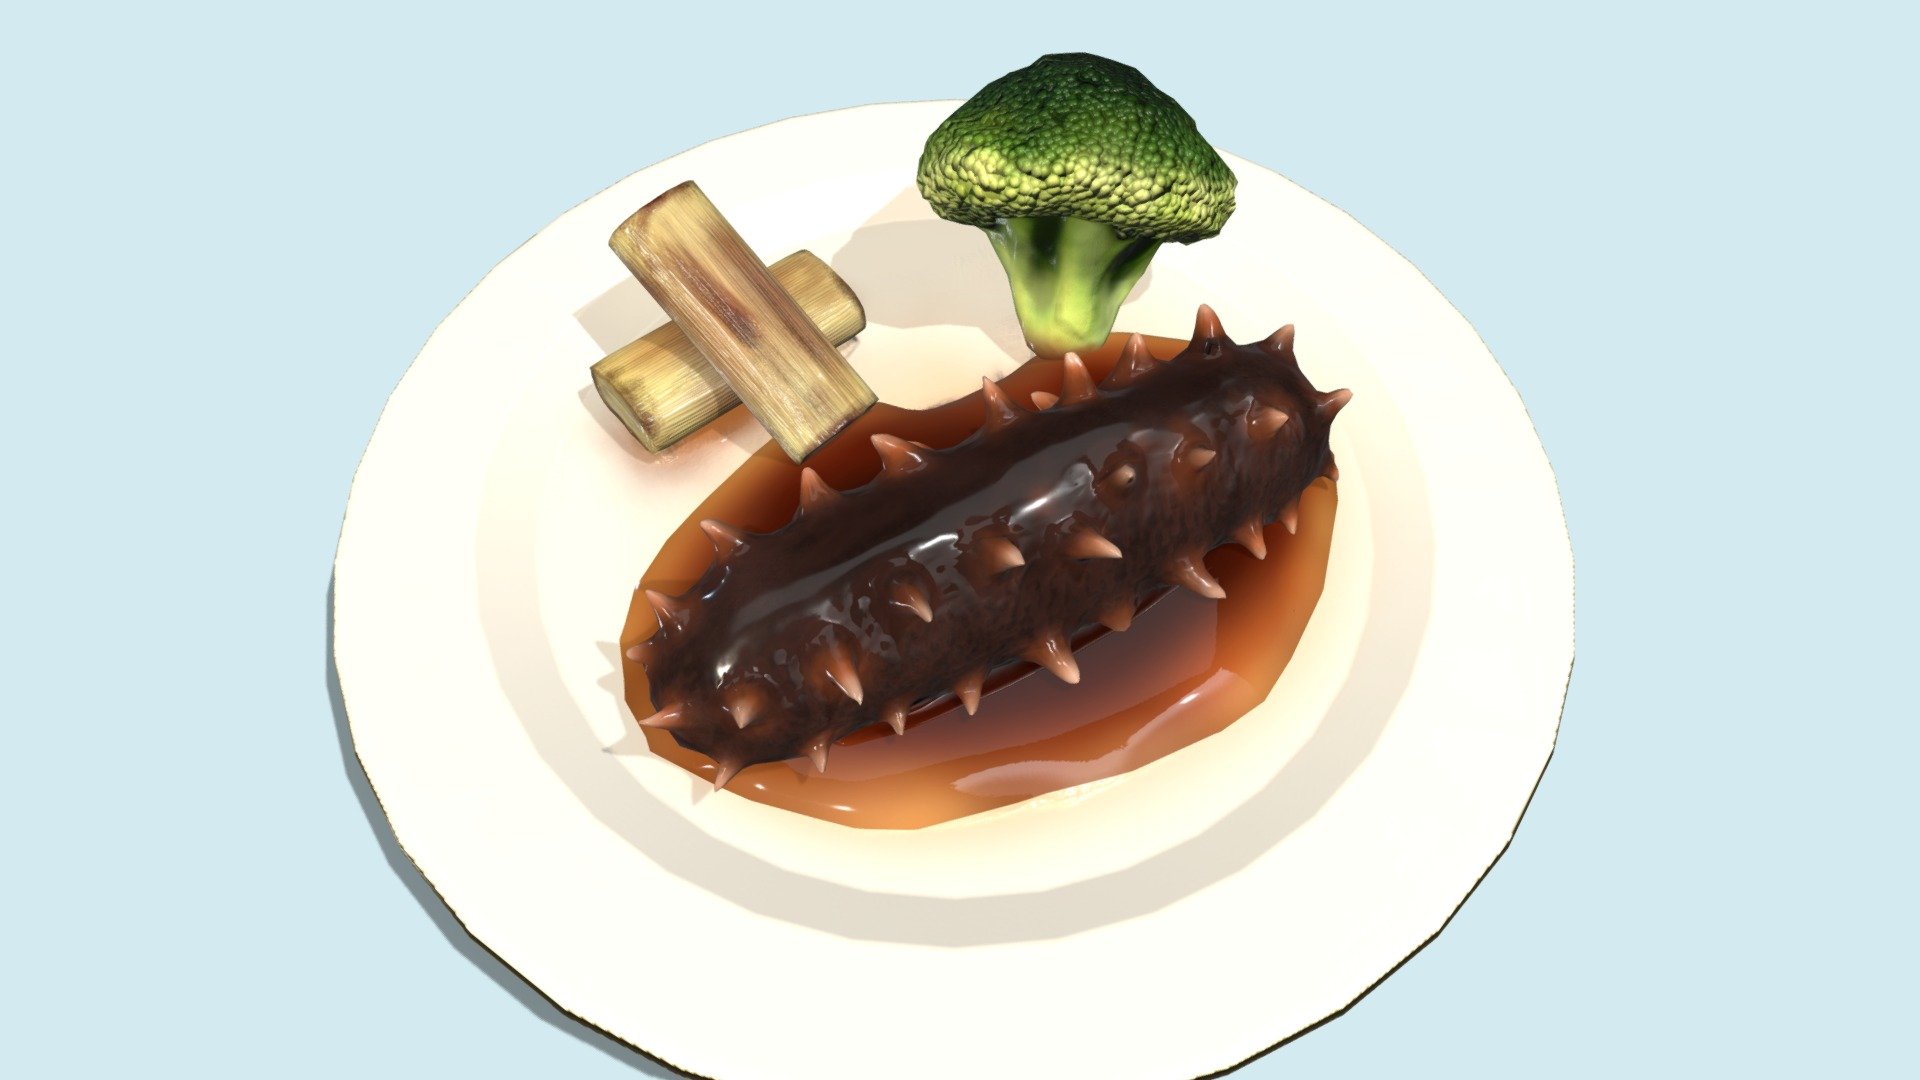 Hi~ It is a Asia food_Braised sea cucumber

It has 4860 Polys and 4822 Vertex.
It can be used in game,VR,AR,CG. 

It have 5 textures(PBR)

2048*2048 size

BaseColor1
Ao1
Metallic1
Normal1
Roughness*1

Display pics use Marmoset Toolbag to render.

I hope you like it~

Thank you.If you have any question , please tell me 3d model